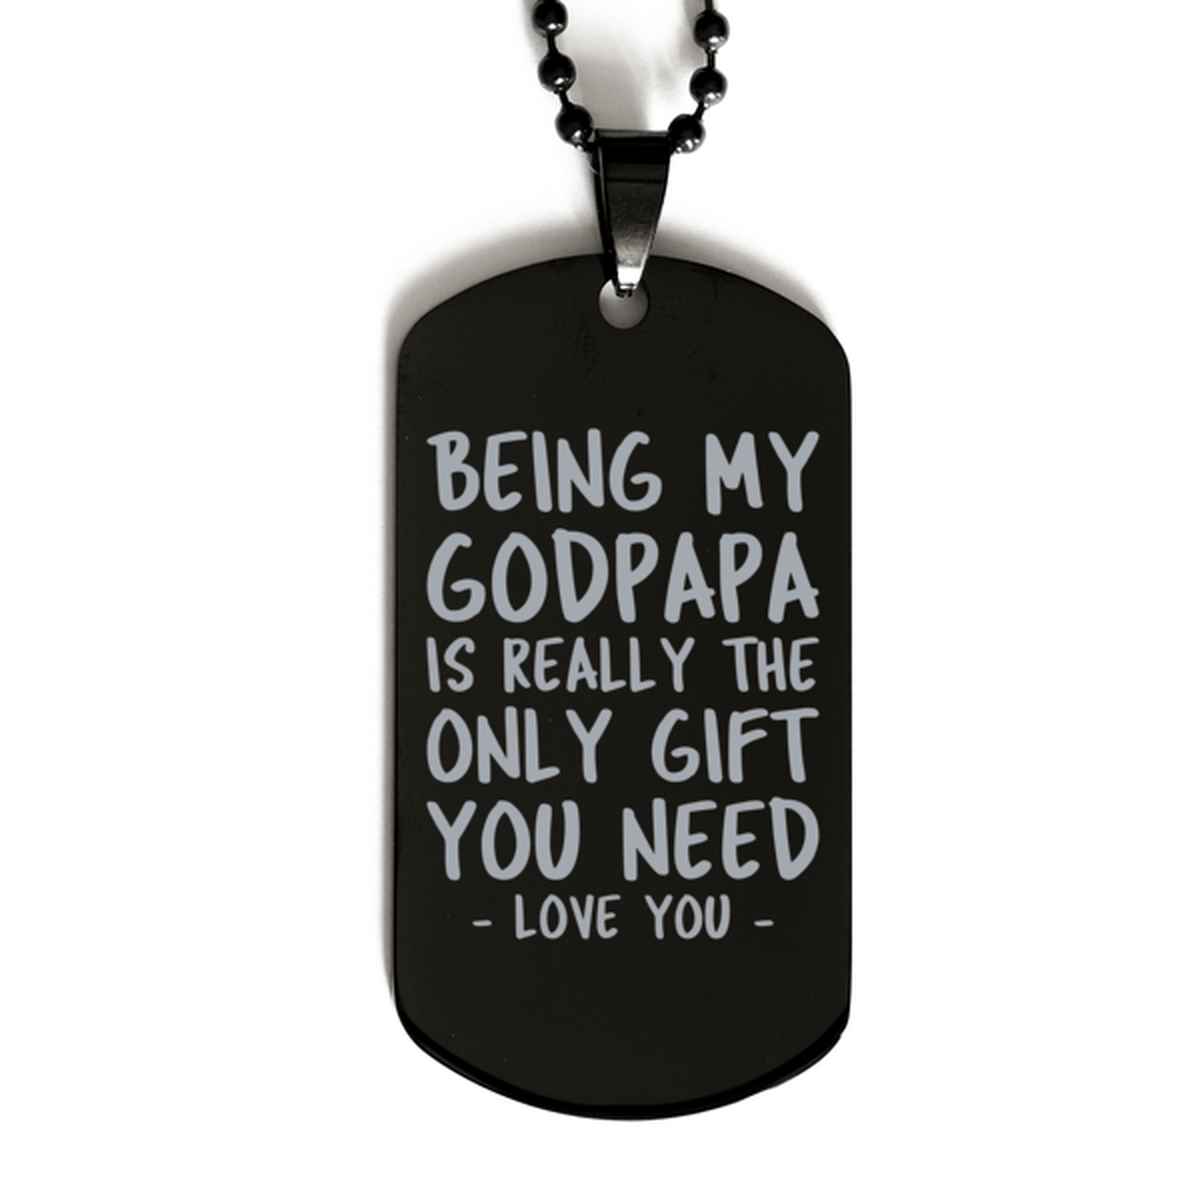 Funny Godpapa Black Dog Tag Necklace, Being My Godpapa Is Really the Only Gift You Need, Best Birthday Gifts for Godpapa